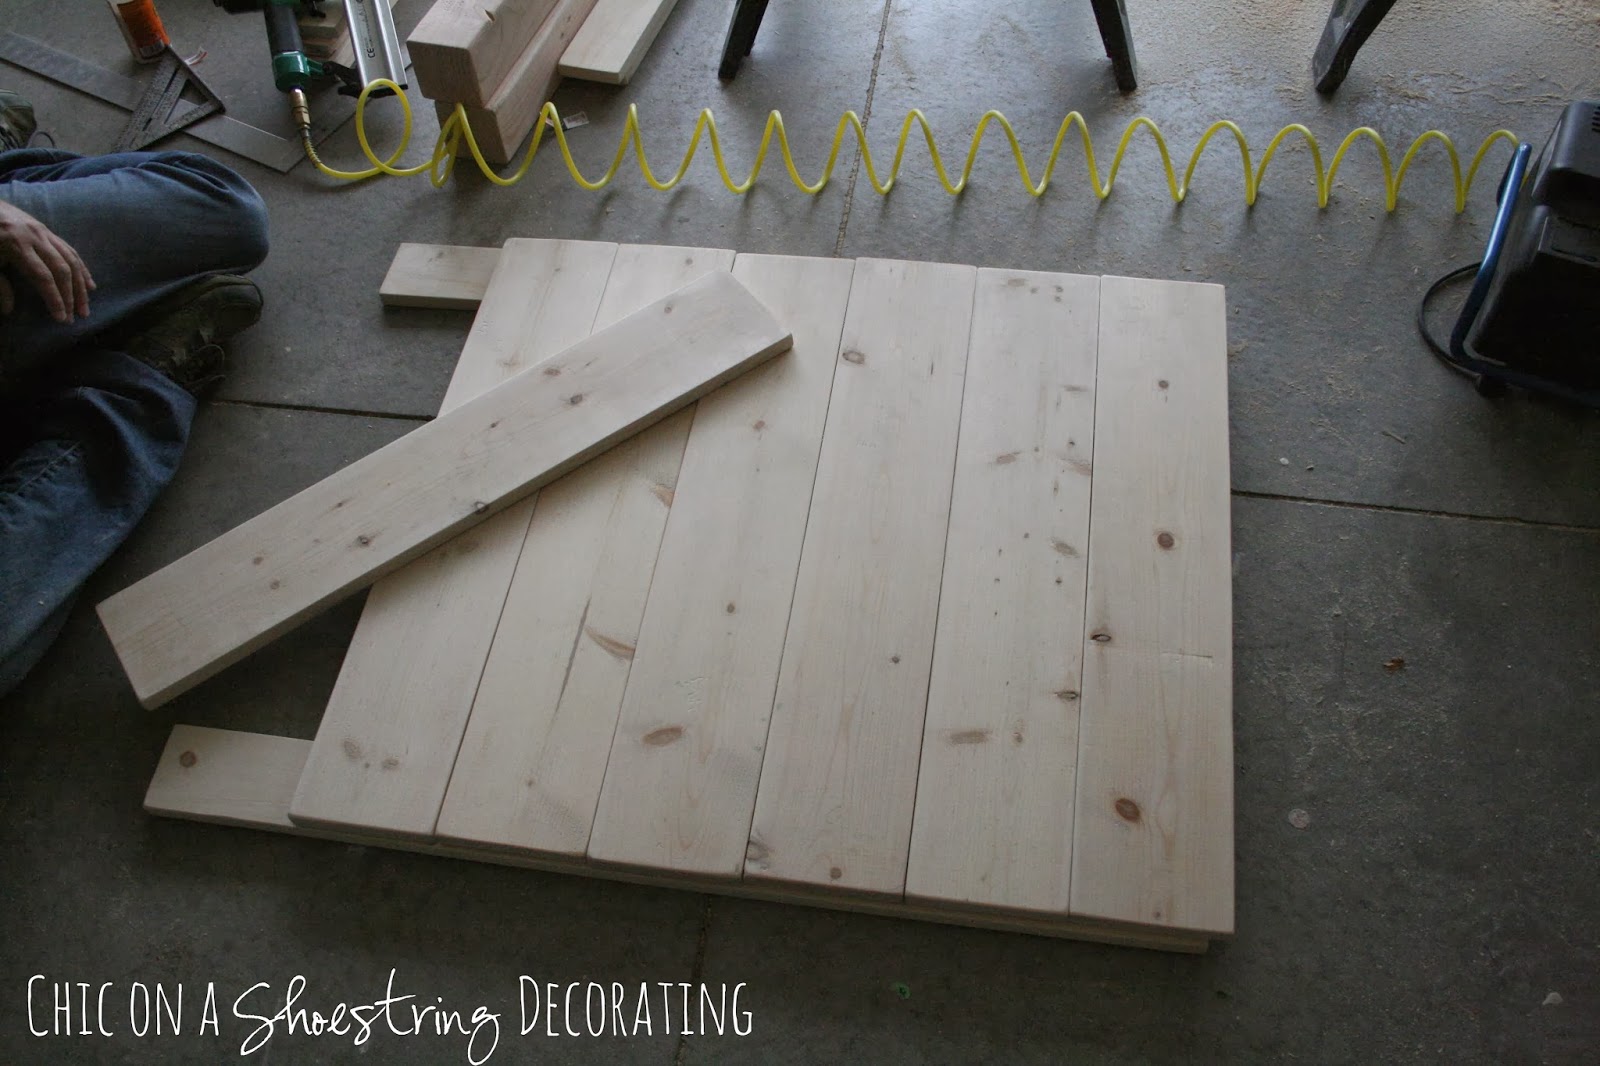 How to Build a Rustic, Wooden Headboard with an attached light fixture. Headboard Tutorial by Chic on a Shoestring Decorating.